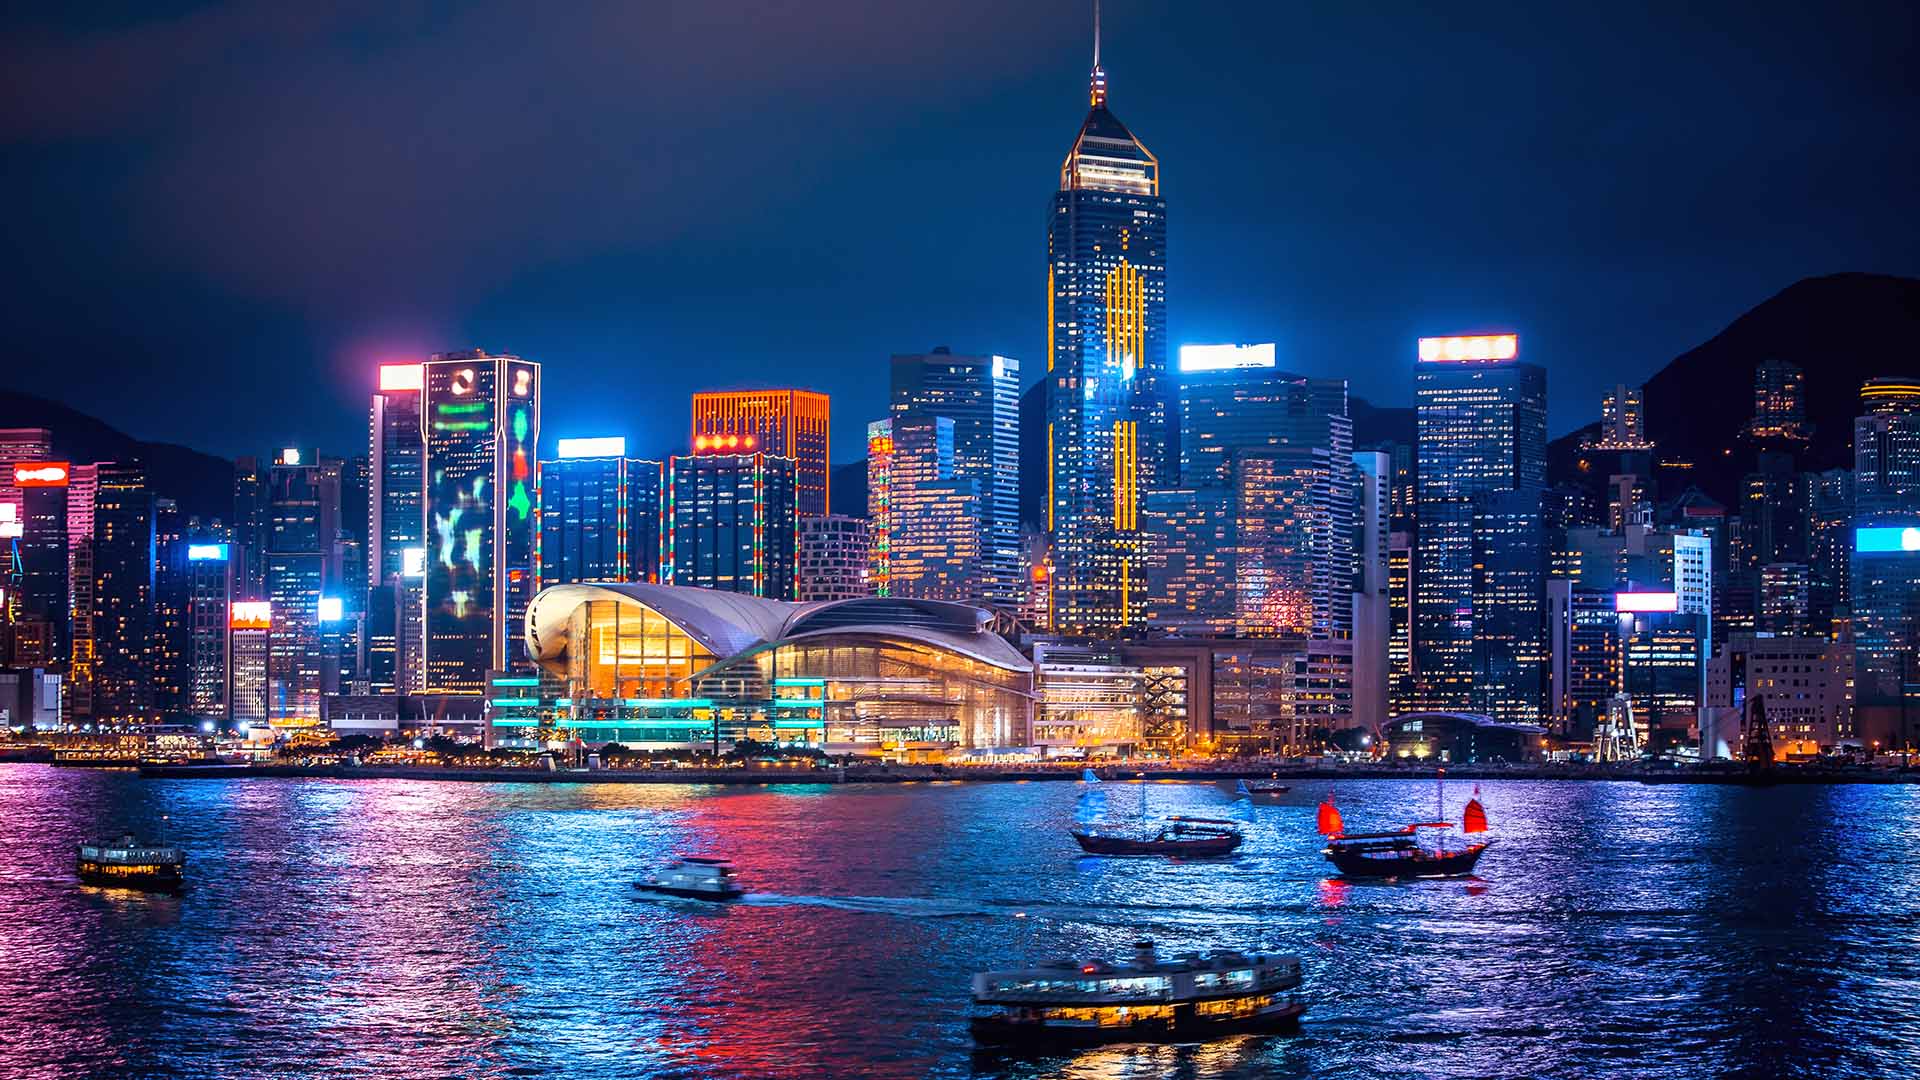 10 tips for making the most of your Hong Kong trip